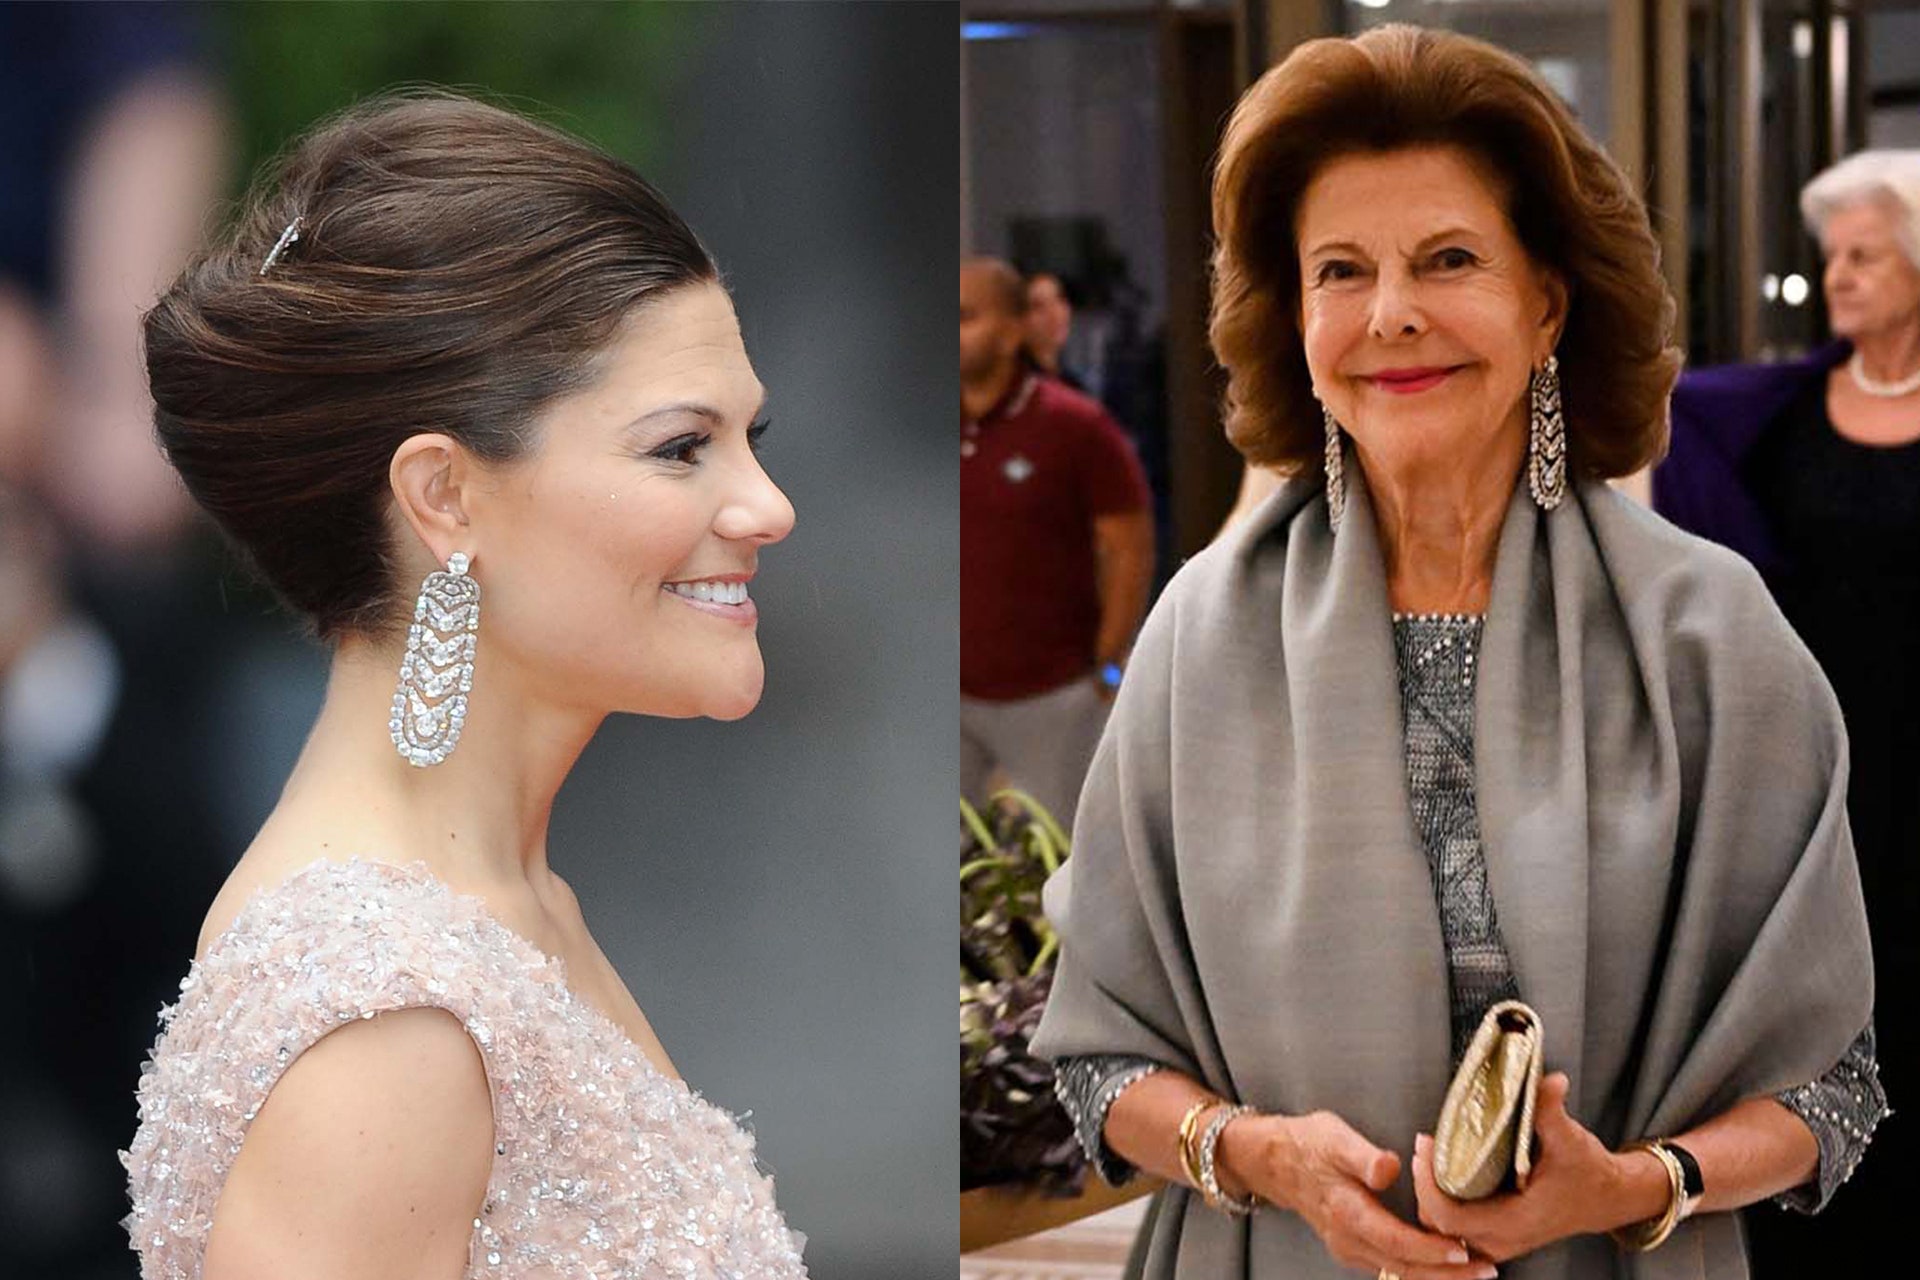 family-jewels:-queen-silvia-of-sweden-steps-out-in-her-daughter’s-diamond-earrings-–-as-letizia-of-spain-borrows-from-her-mother-in-law